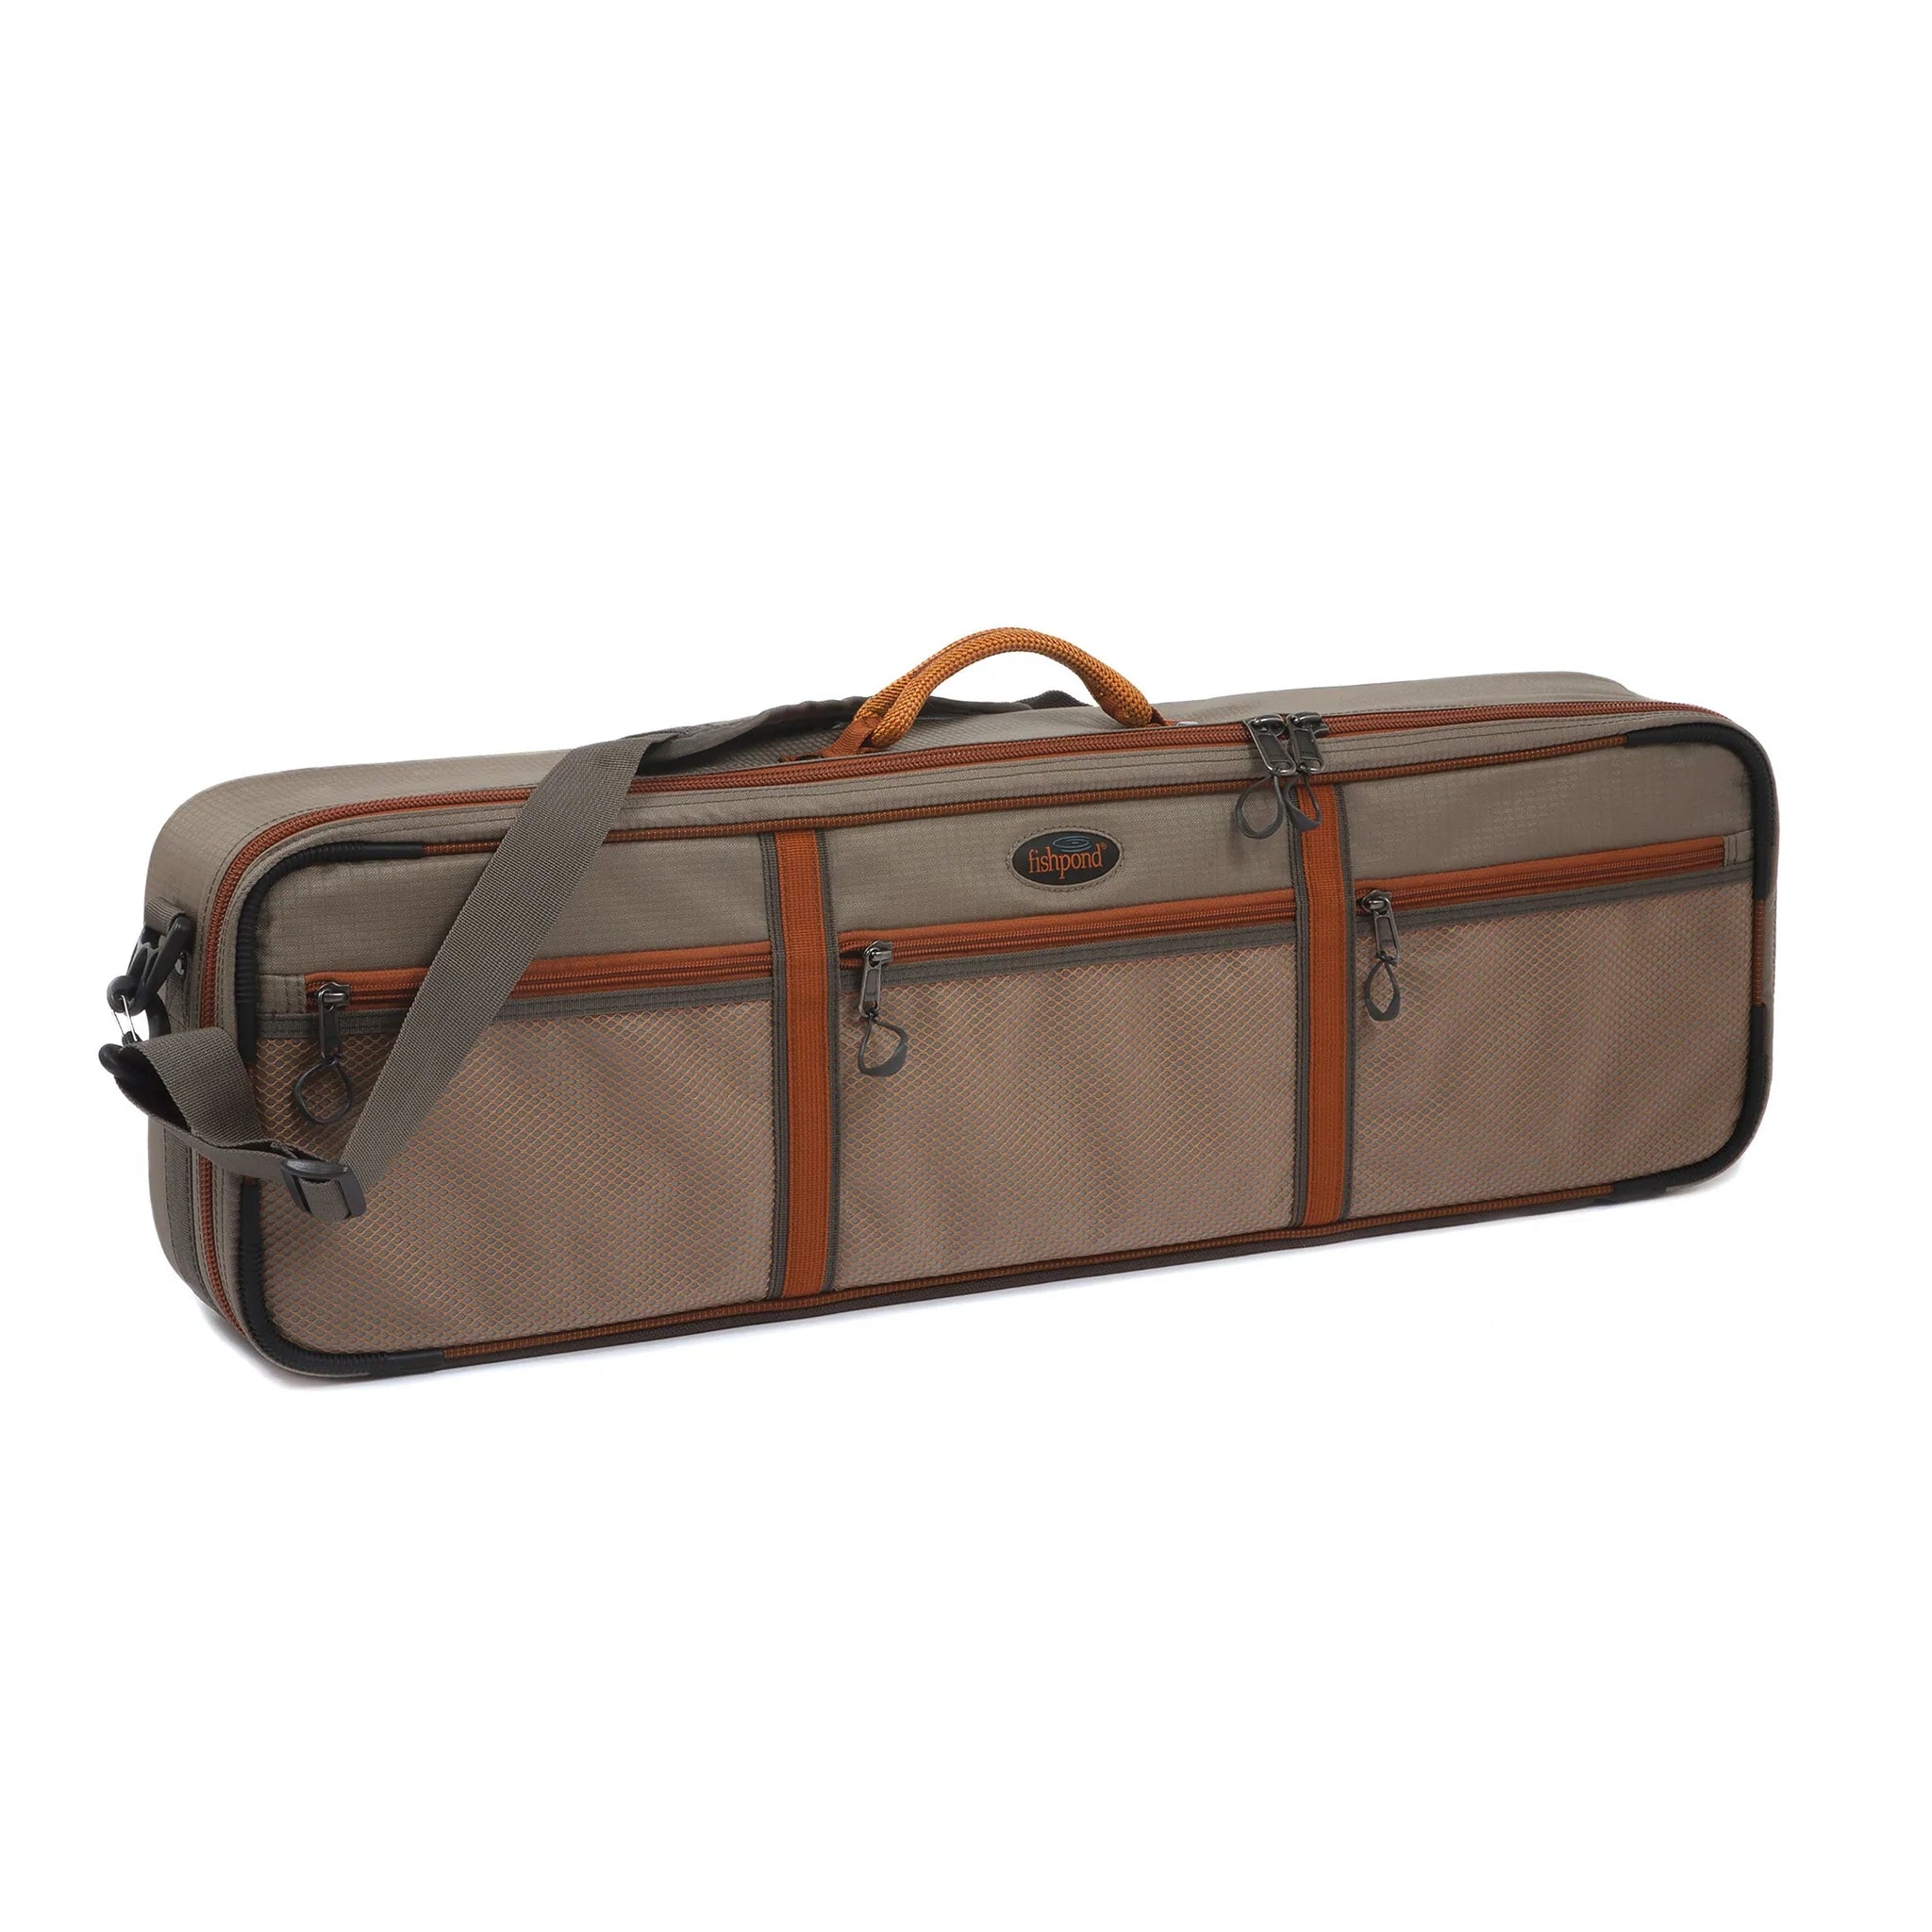 The Dakota Carry-On Rod & Reel [and snack] Case.